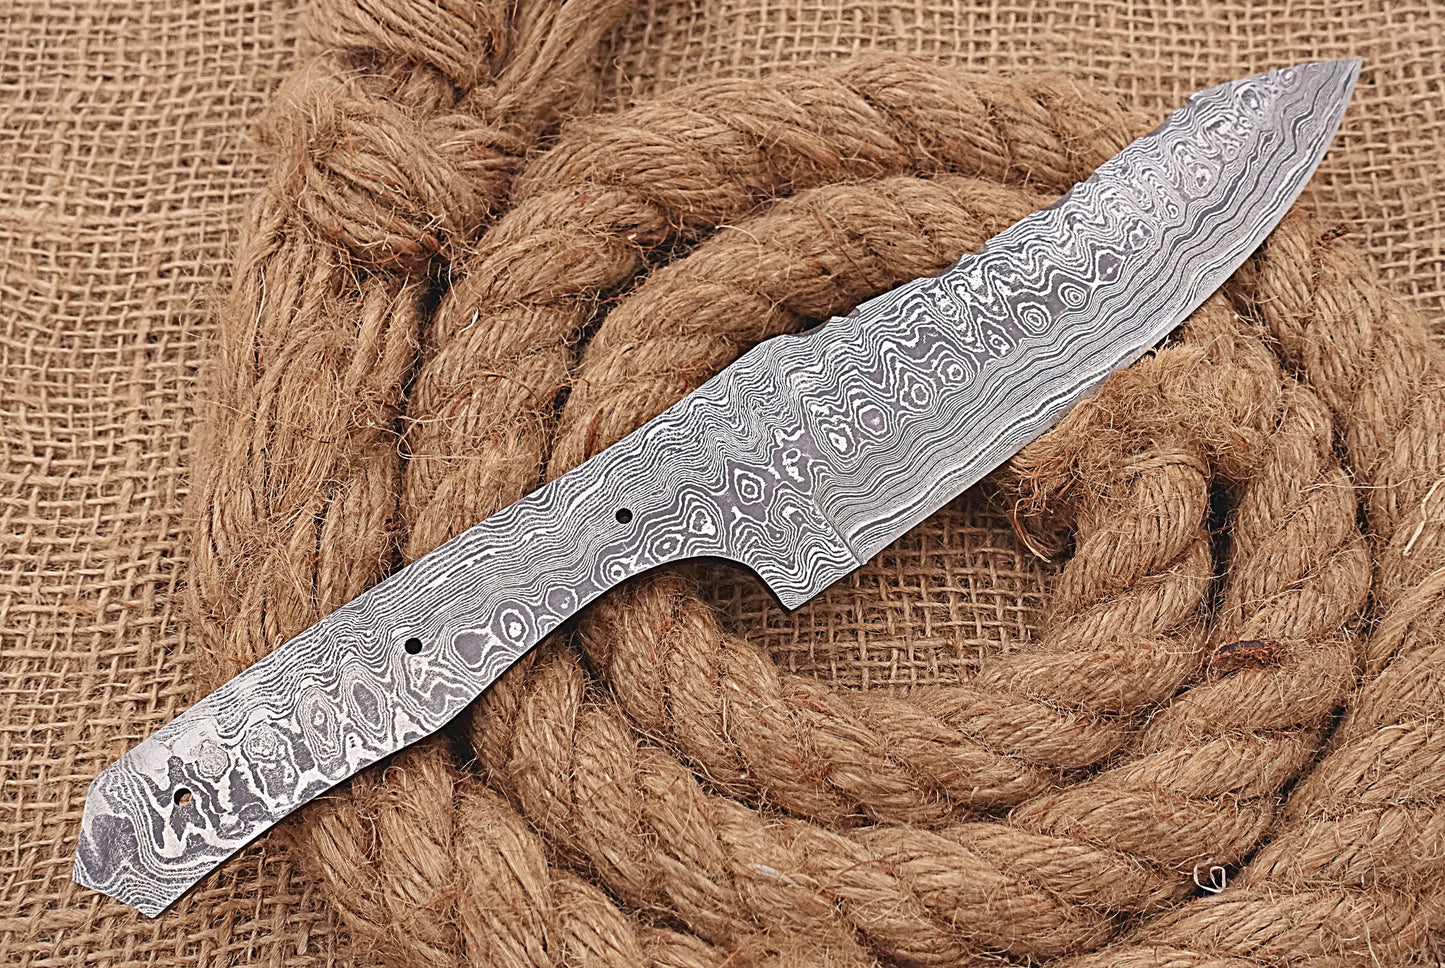 10.5 inches Long Damascus Steel Nessmuk Blade Skinning Knife, Knife Making Supplies, Hand Forged rain Drop Pattern Damascus Steel Blank Blade Hunting Knife, 5.25" Cutting Edge, 4.5" Scale Space